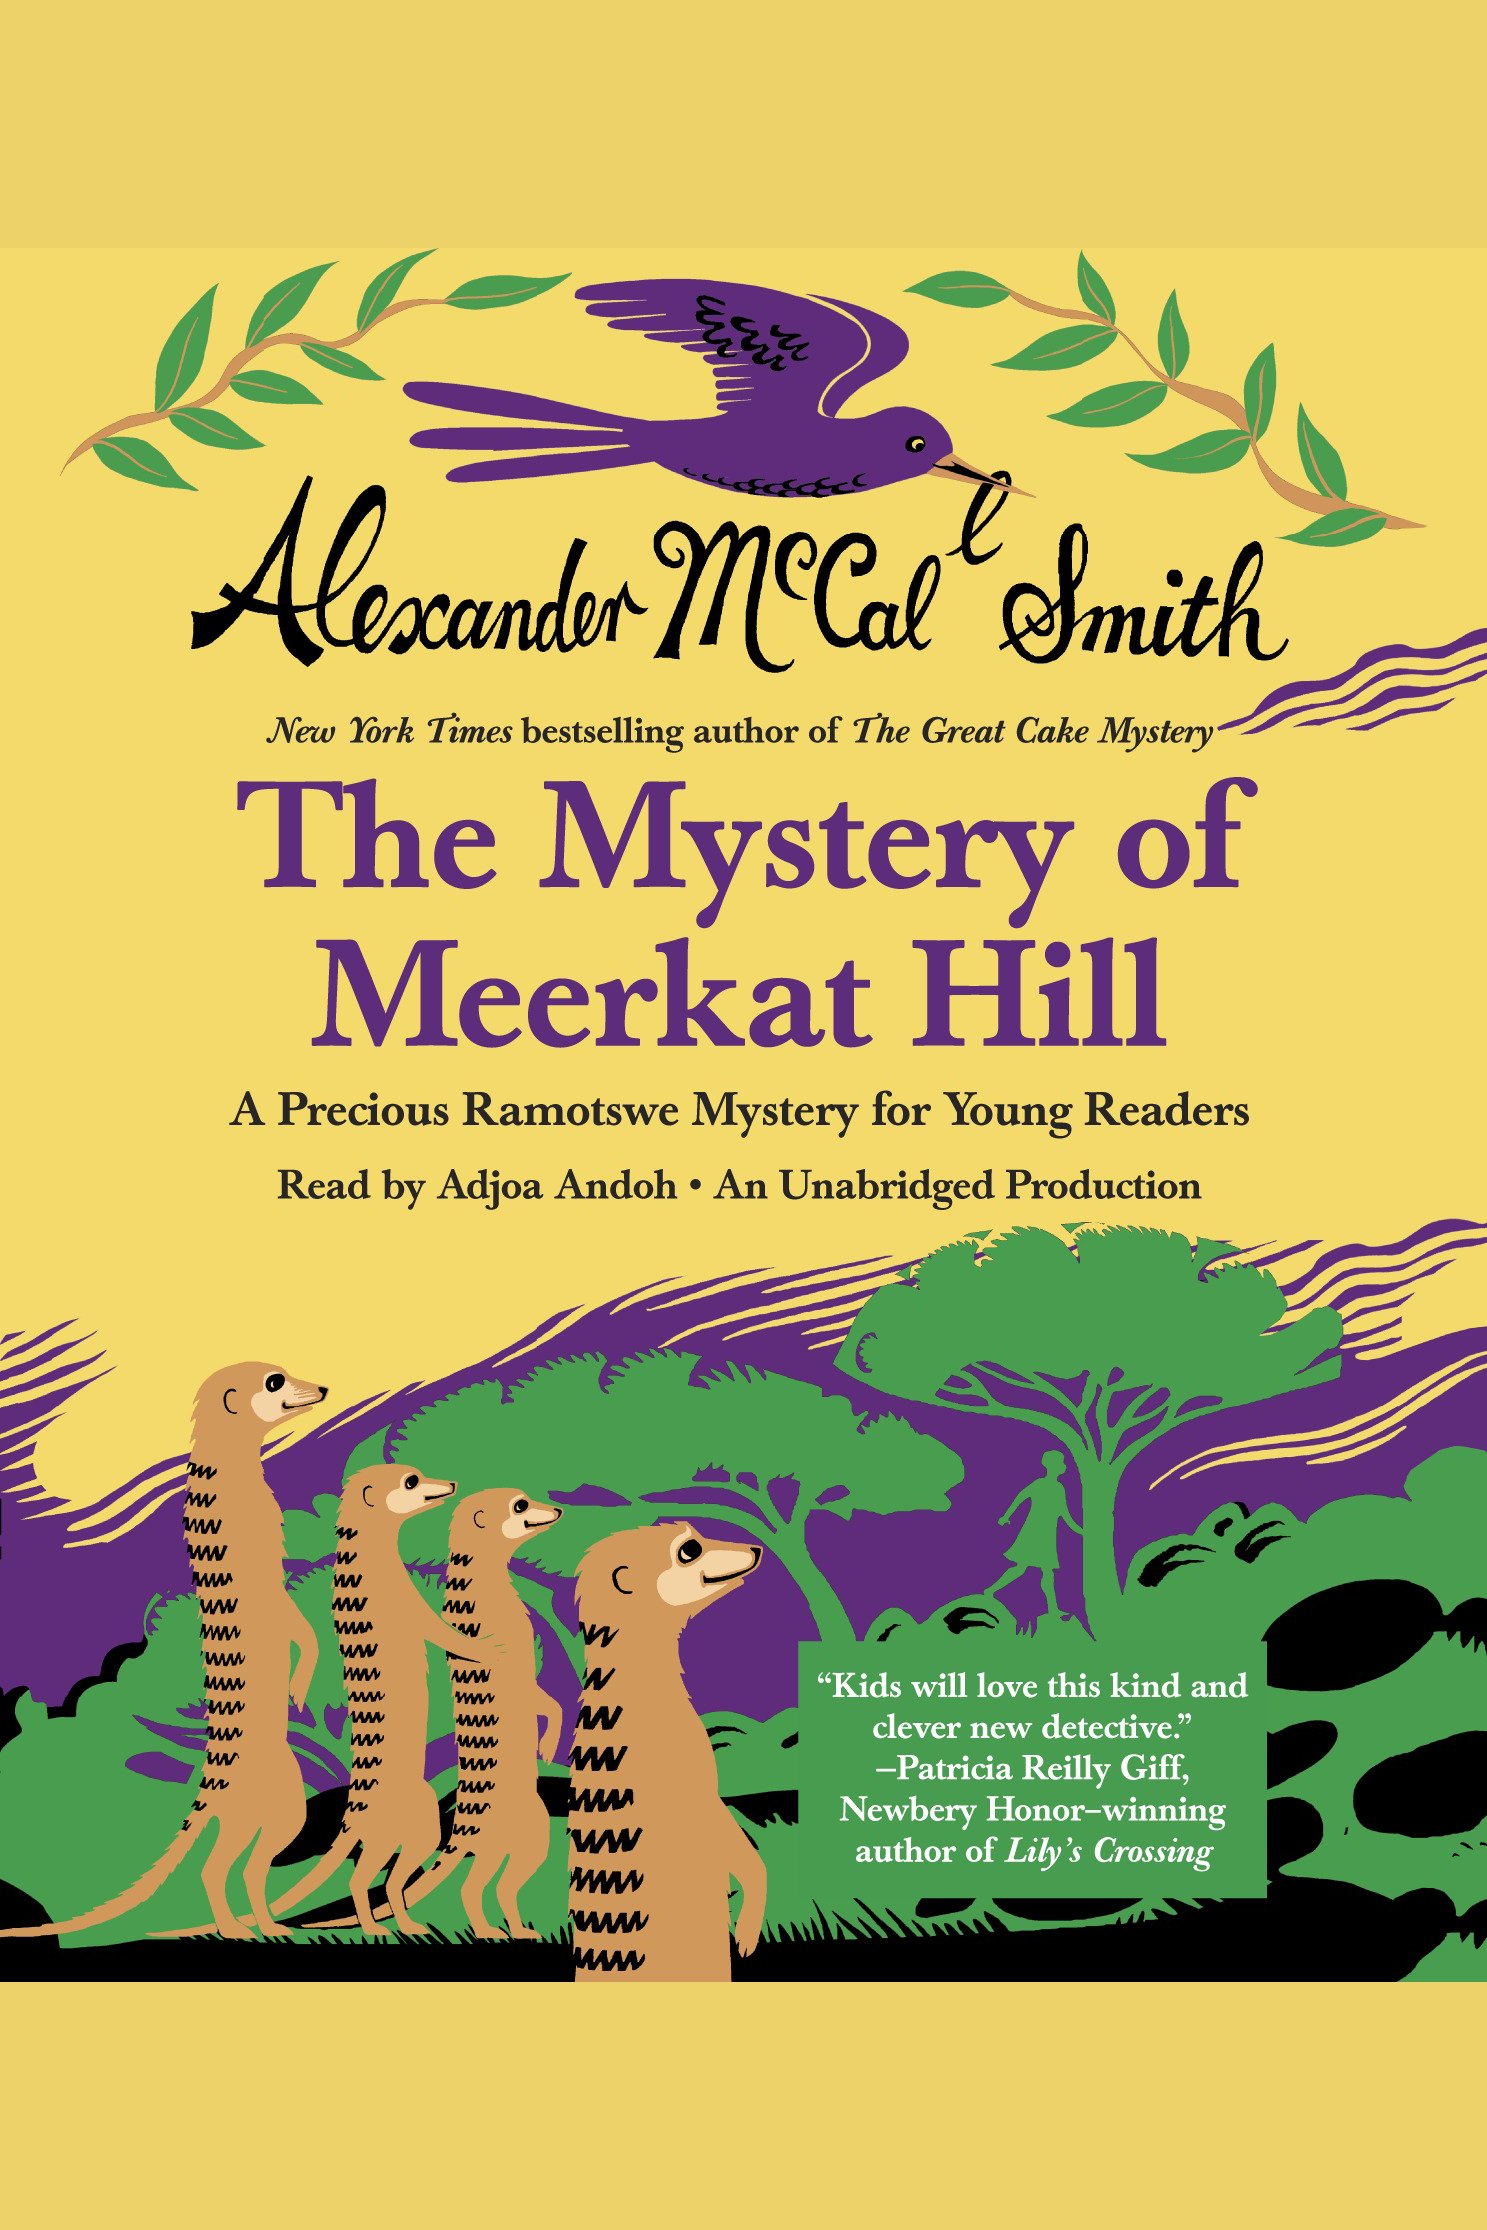 The mystery of Meerkat Hill a Precious Ramotswe mystery for young readers cover image